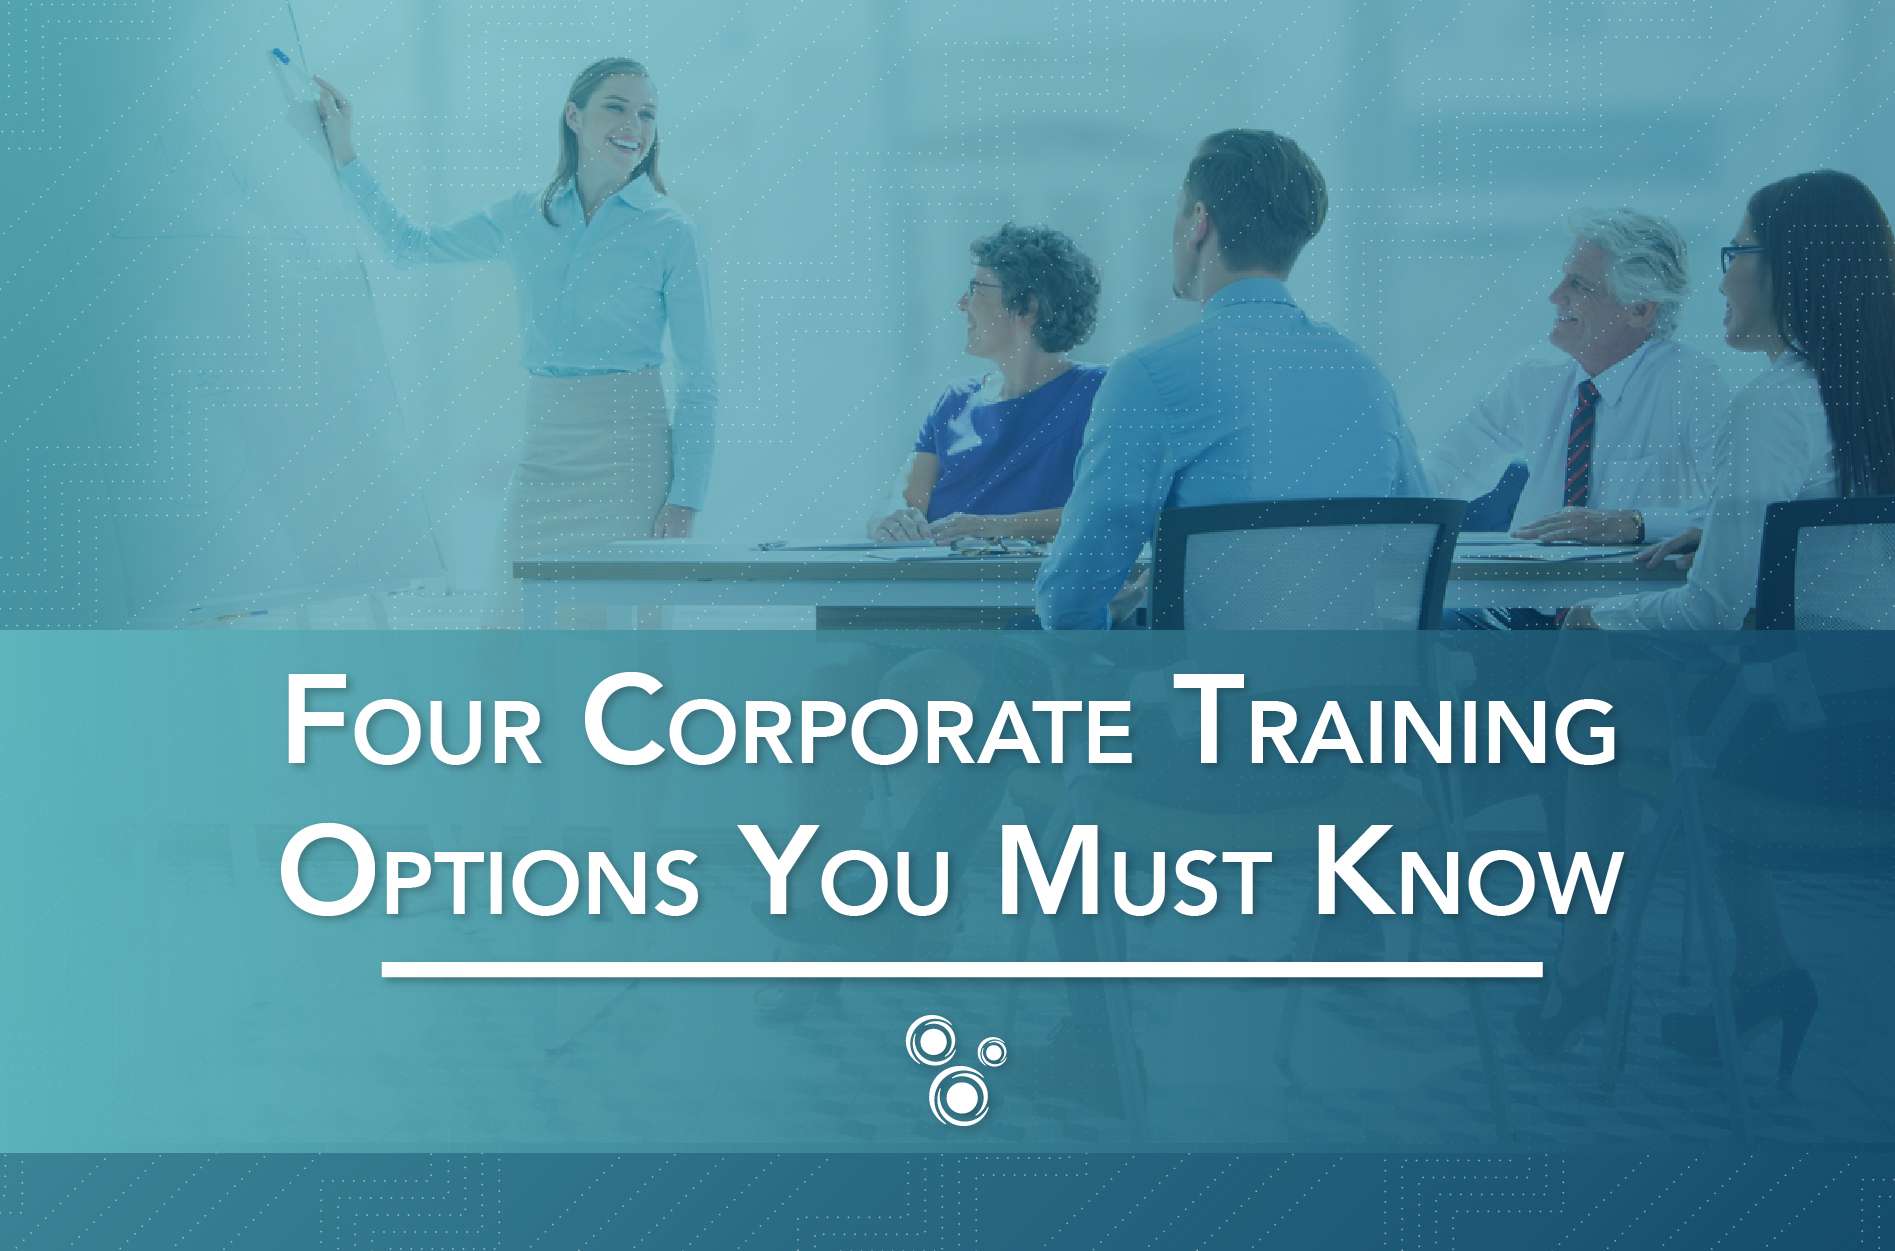 Four Corporate Training Options You Must Know